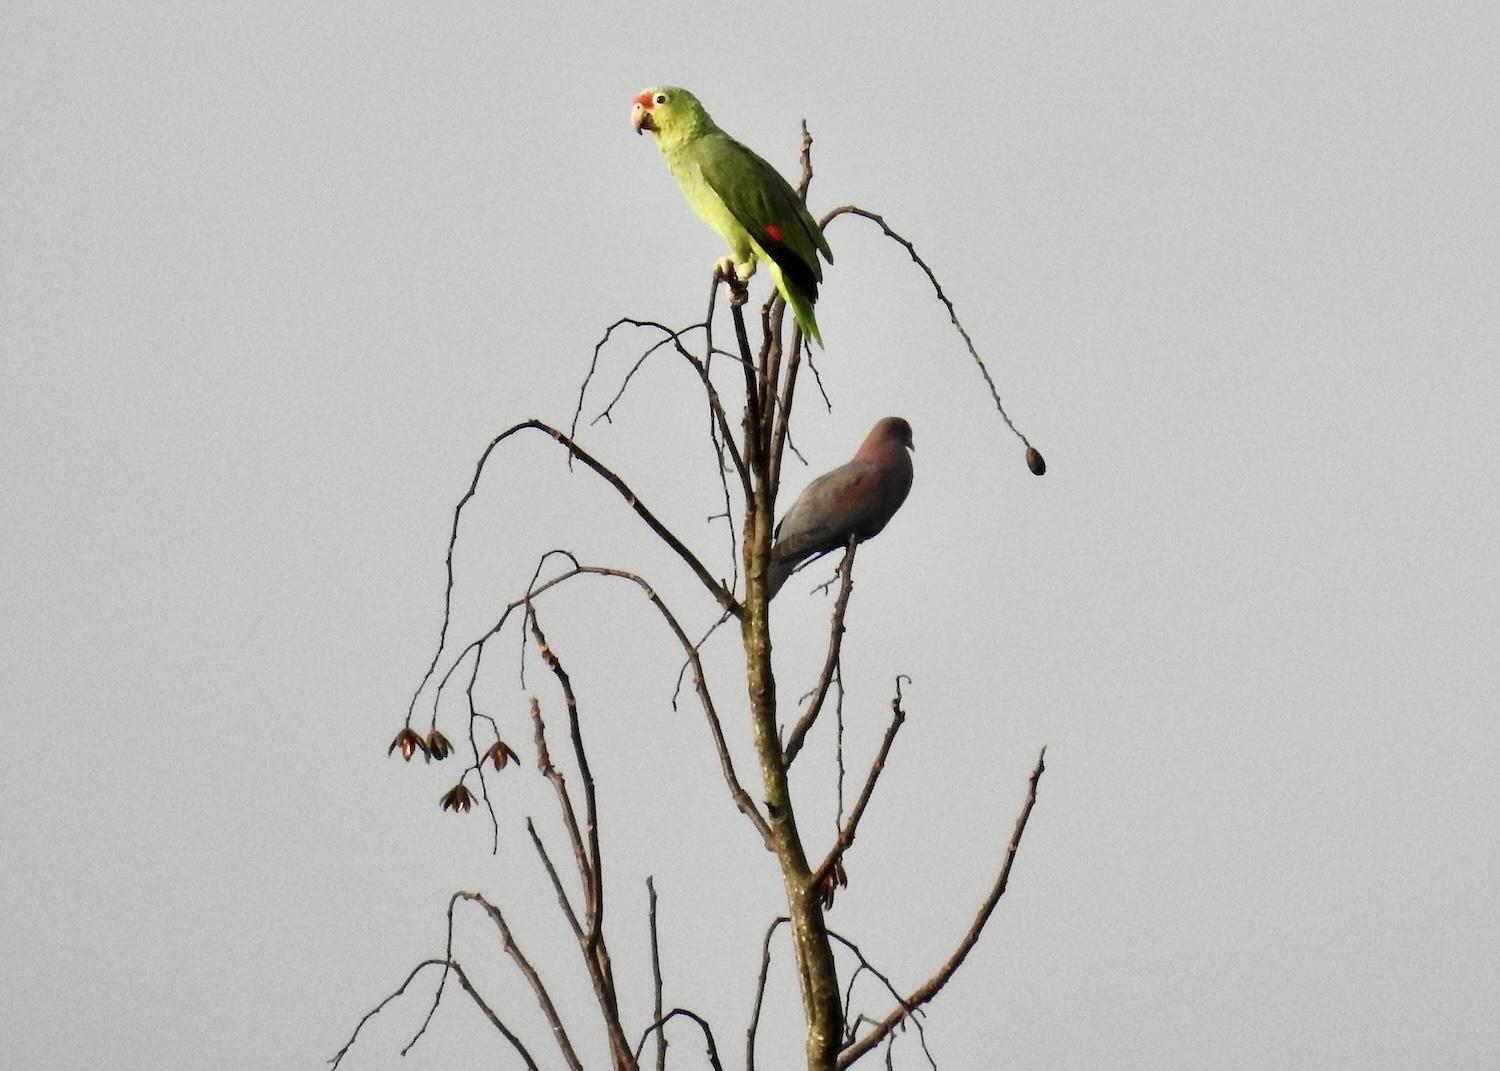 On the grounds of the Arenal Montechiari Hotel in La Fortuna, a Red-lored parrot shares a tree with a Short-billed pigeon.